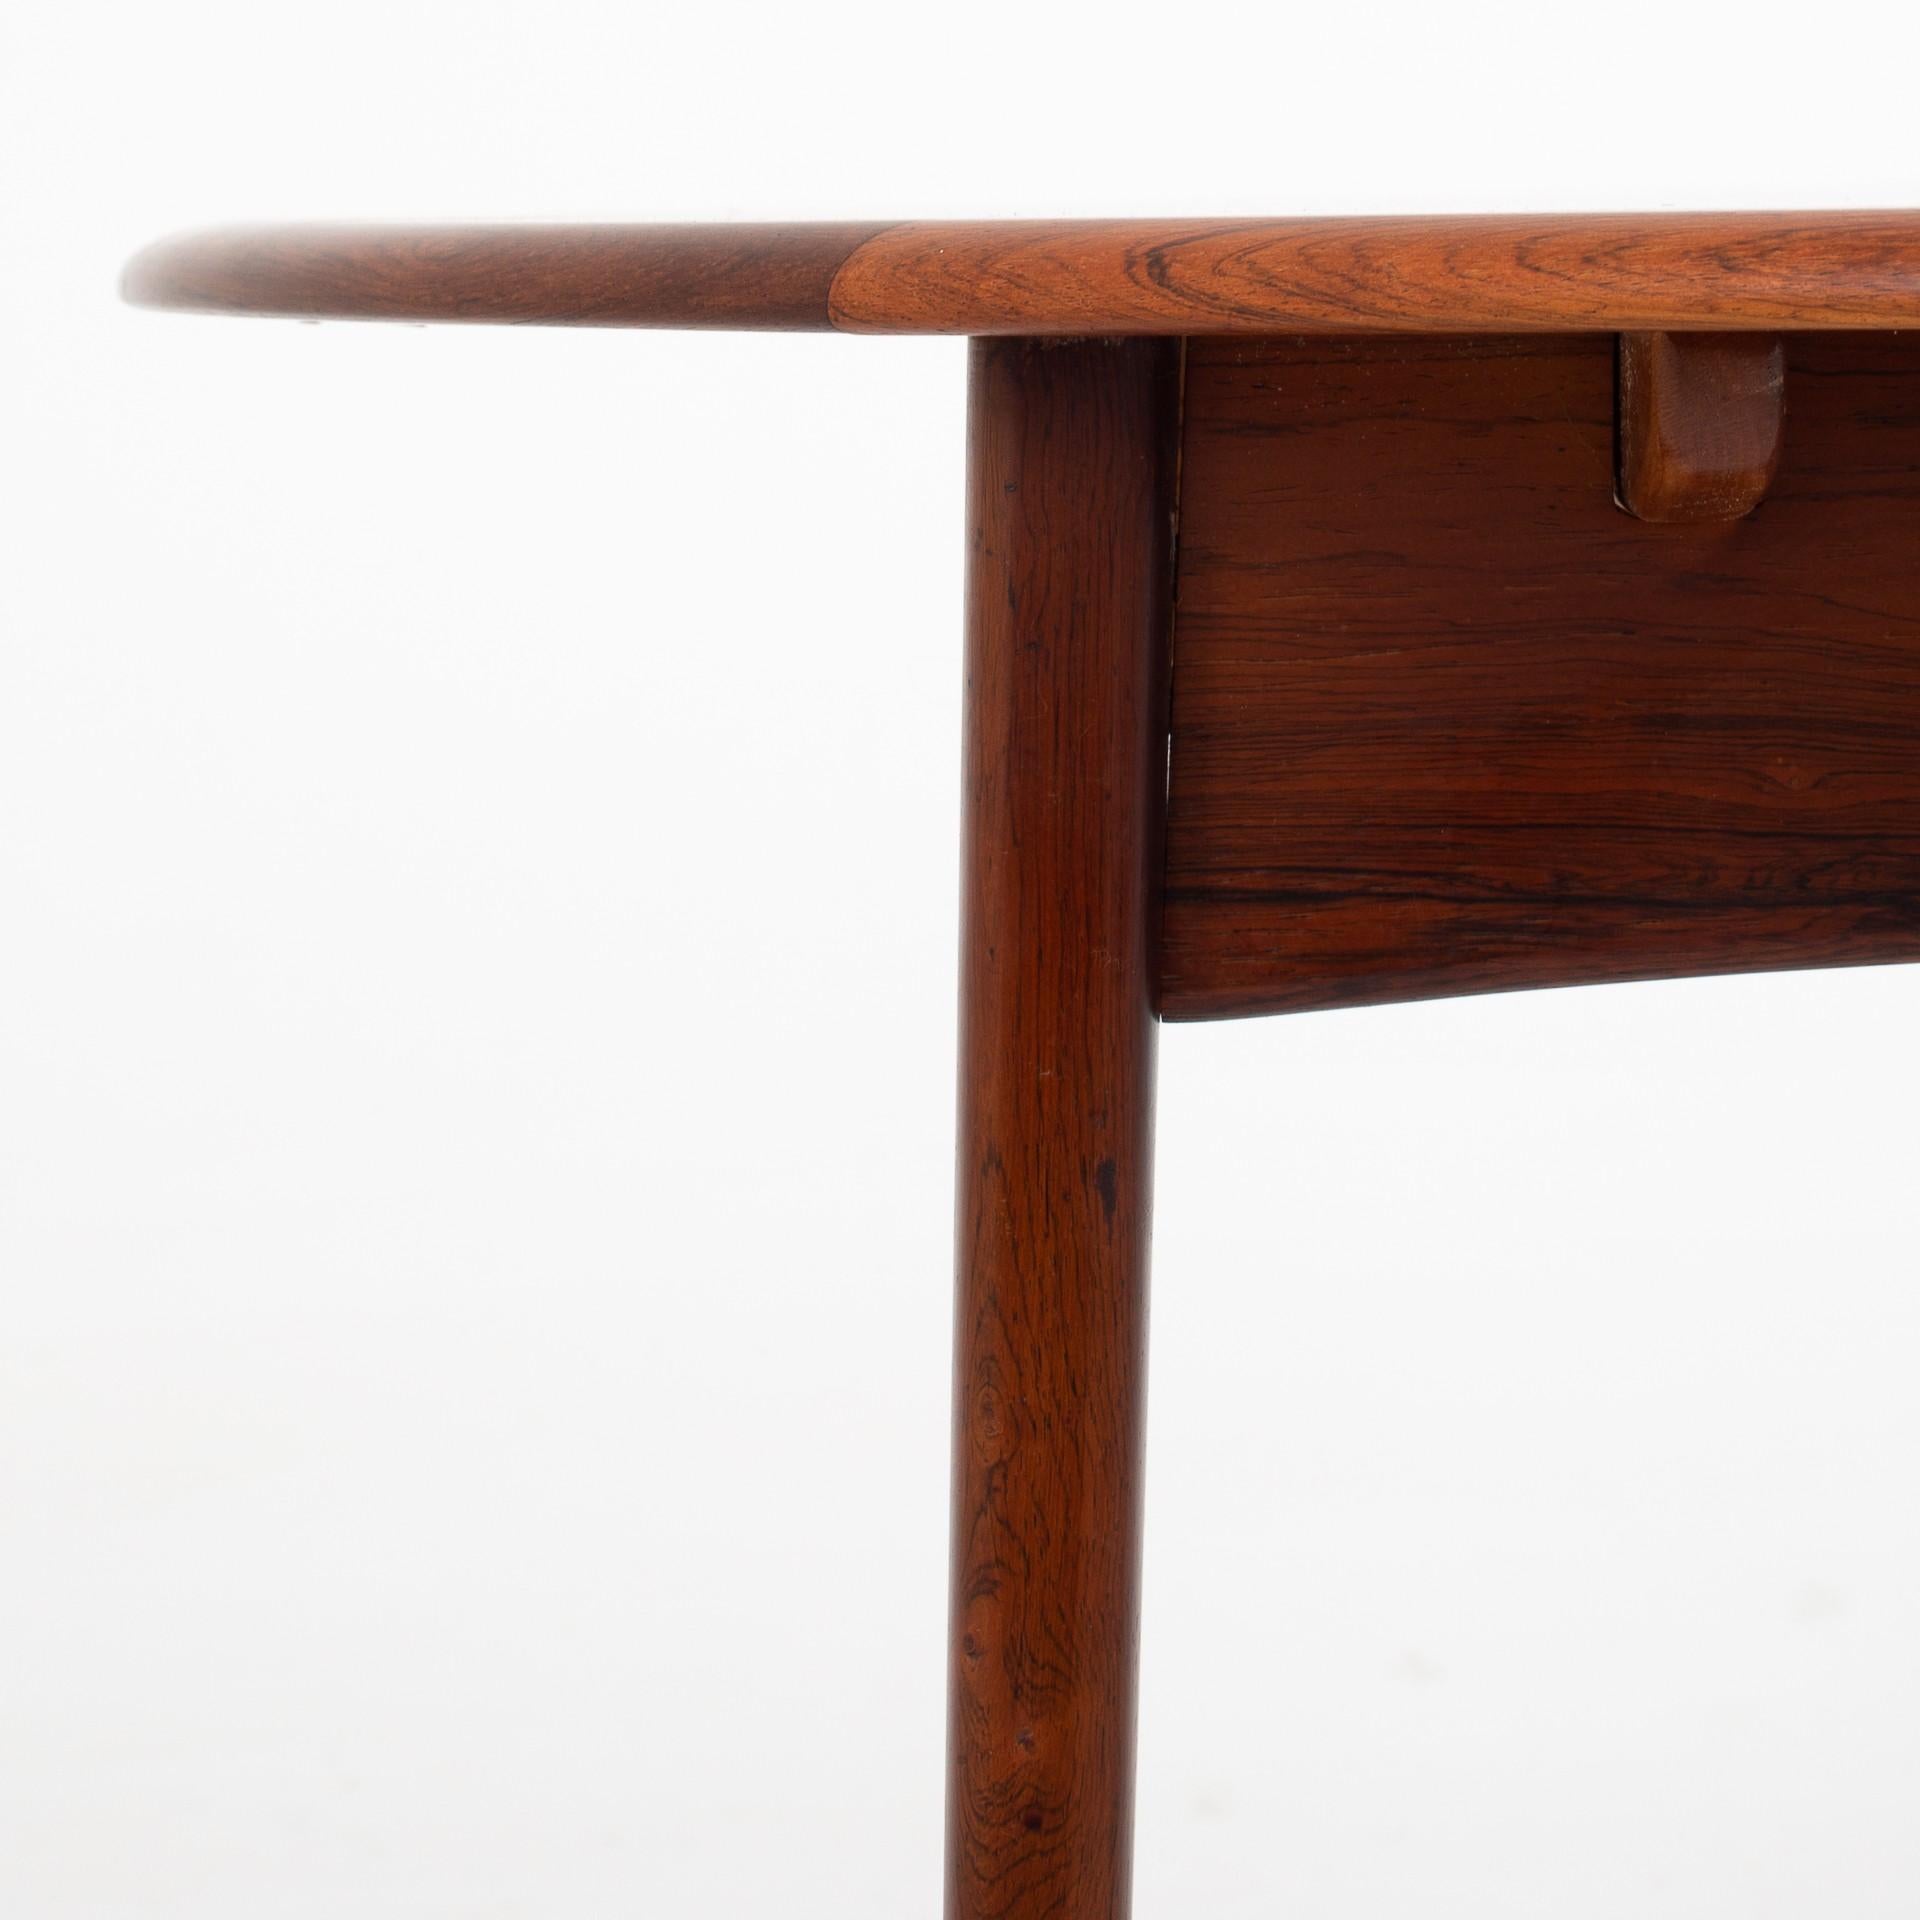 Dining table in rosewood with 2 butterfly extension leaves of 30 cm. Maker K. Knudsen & Søn.